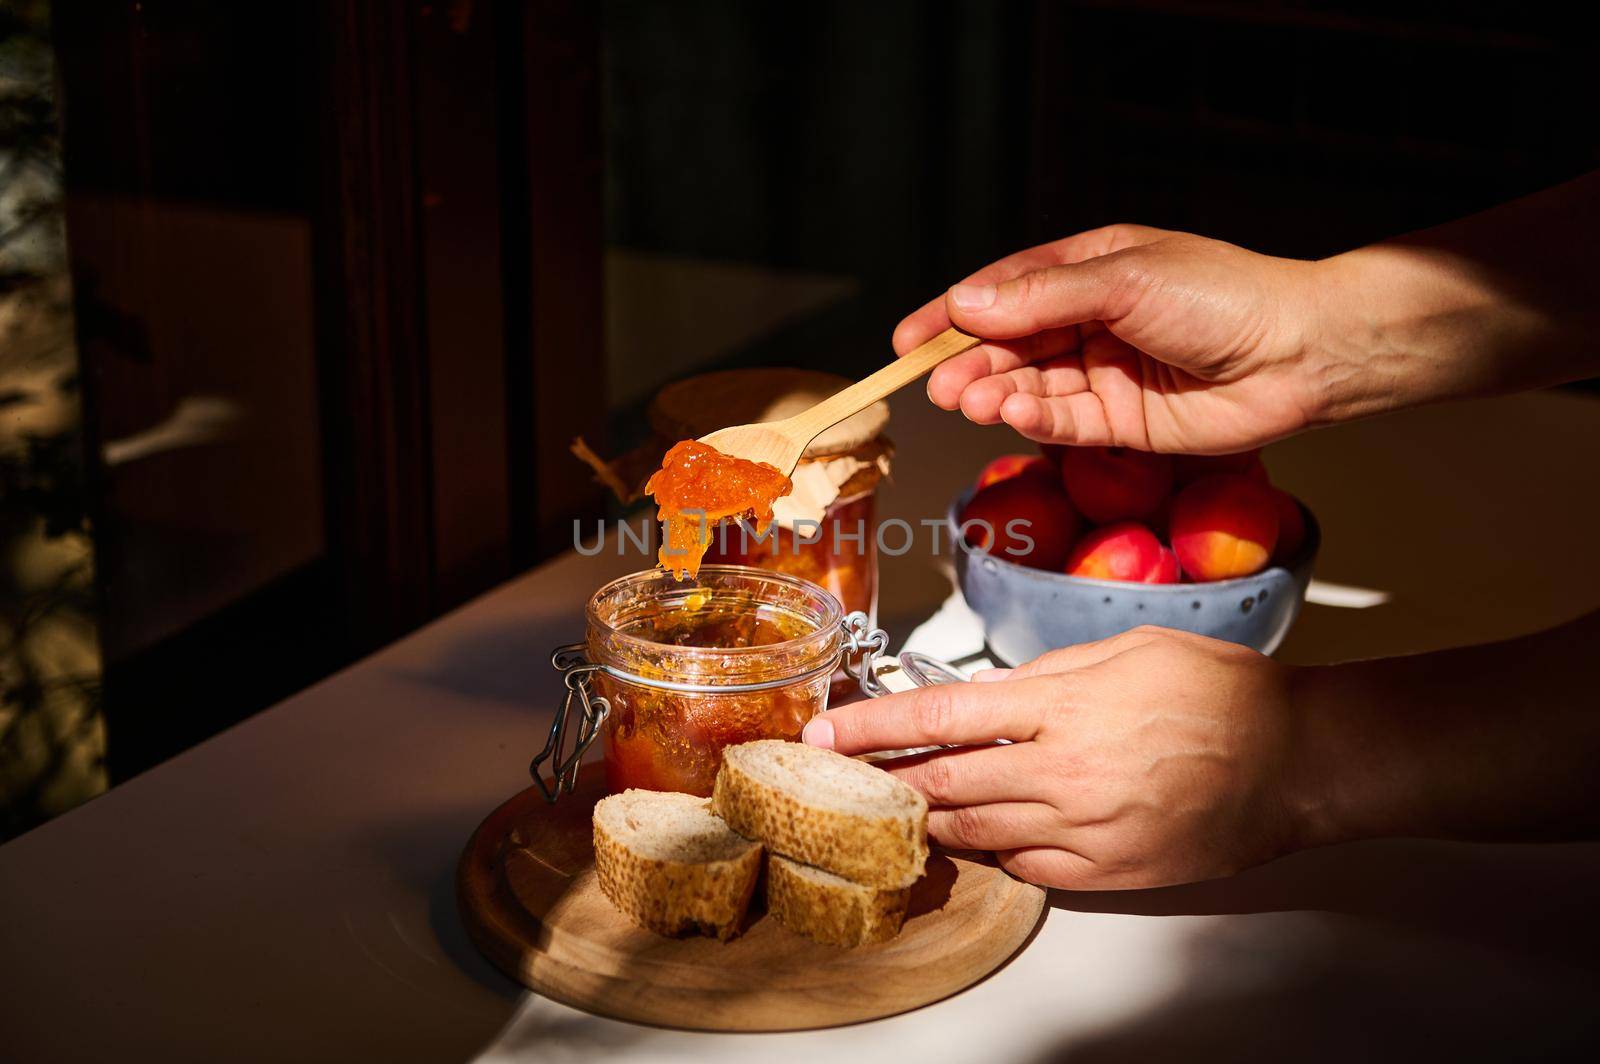 Food and drink, summer autumn harvest concept. Close-up of the hands of a housewife holding a wooden spoon and spreading homemade apricot jam on bread. Image illuminated by daylight.